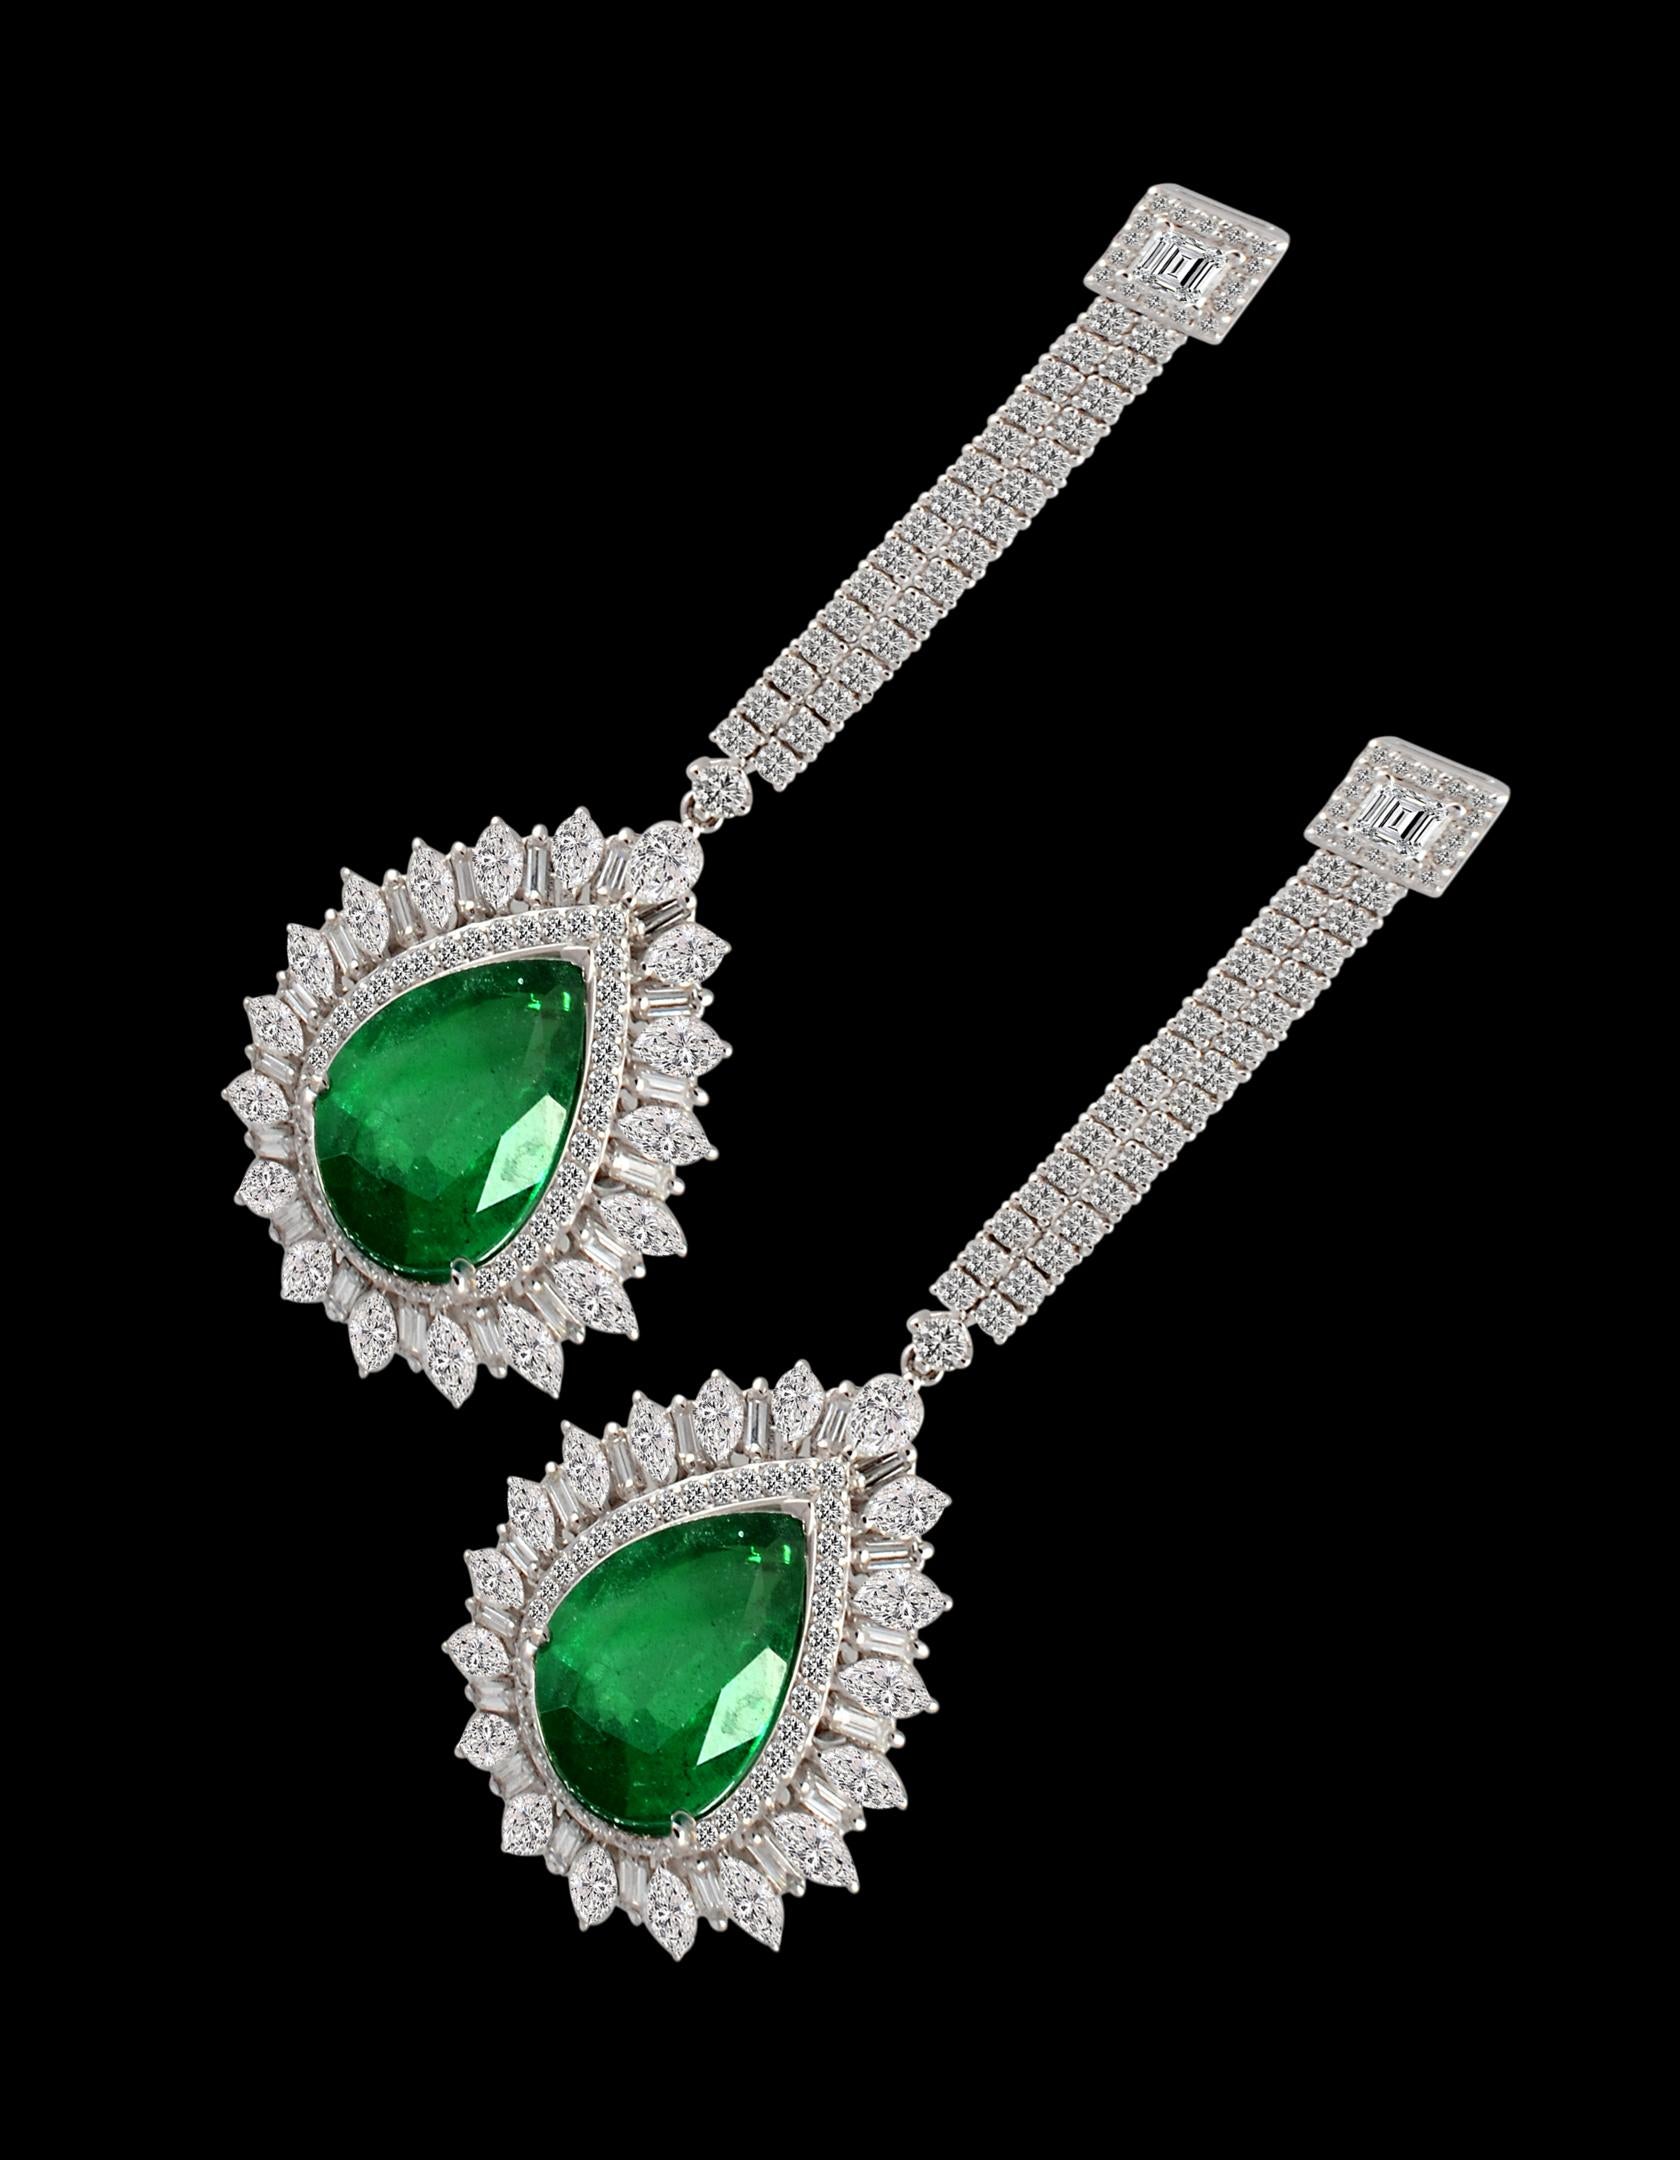 11 Ct Pear shape Zambian Emerald & 6 Ct Diamonds Drop  Earrings 18 Karat  White  Gold
very fine quality of emeralds
Weight of 18K gold 18gm
This exquisite pair of earrings are beautifully crafted with 18 Karat white  gold  weighing  16.5 